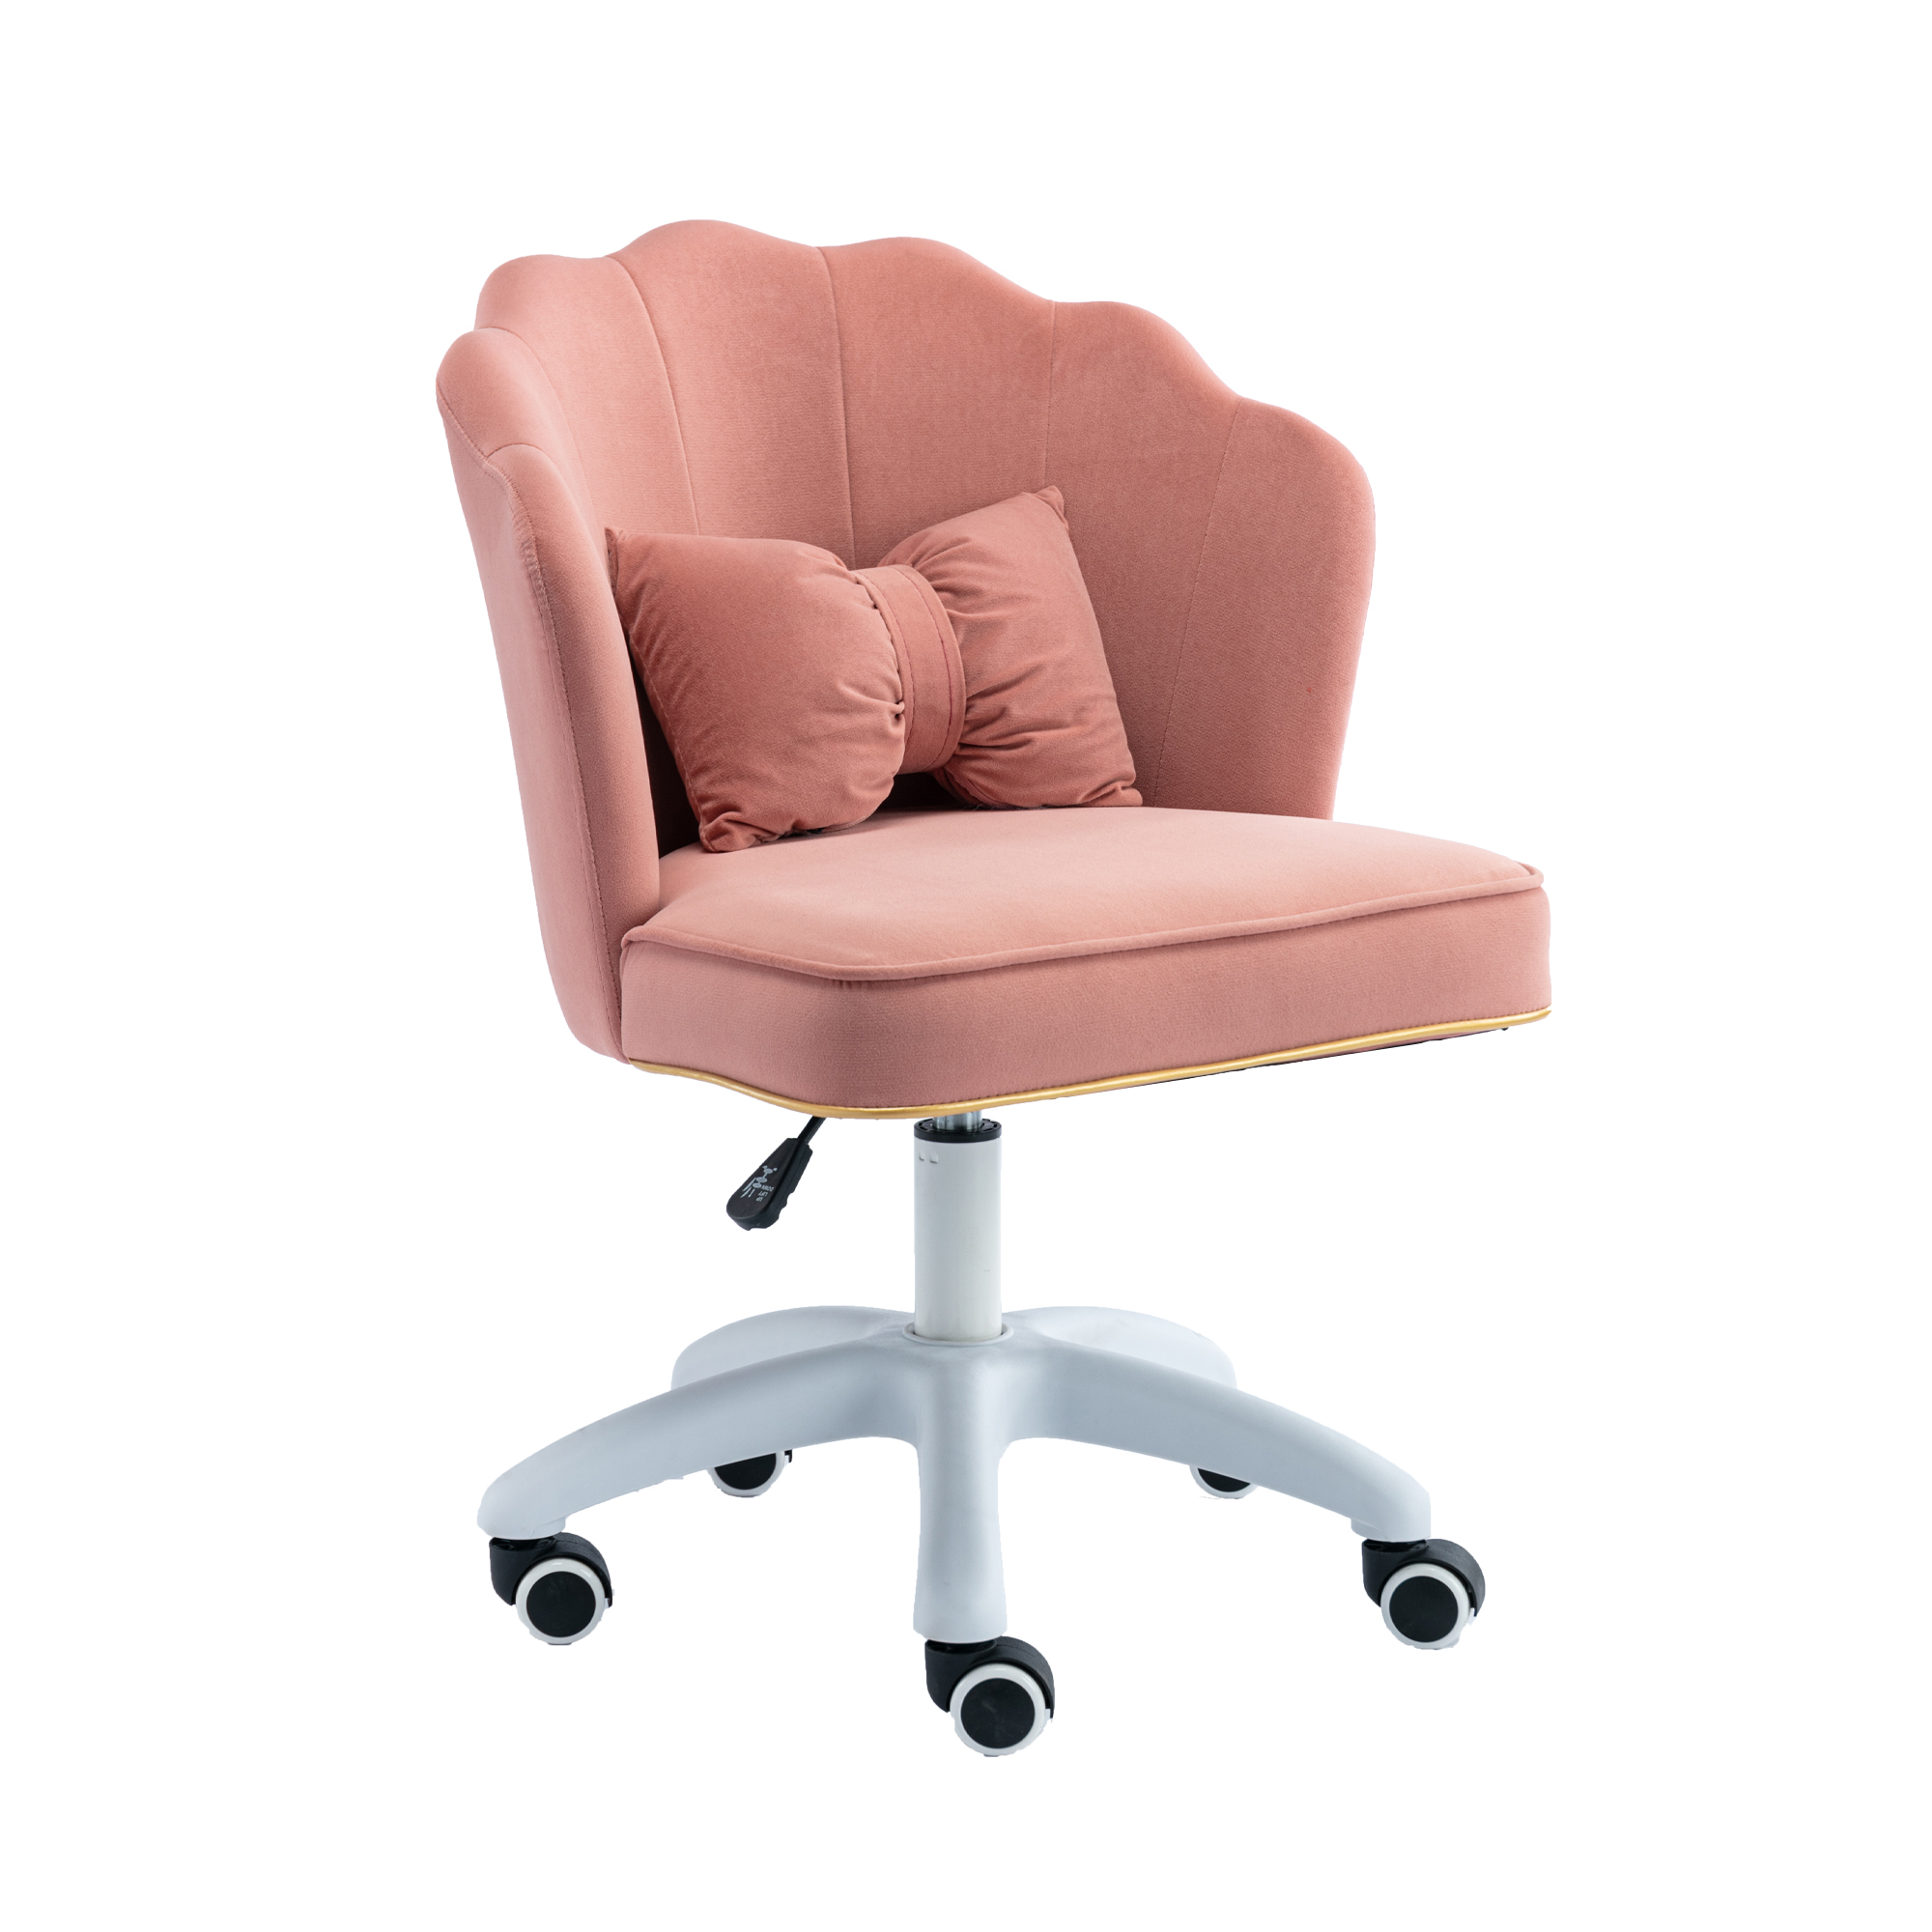 Hengming Desk Chair Fabric Task Chair Home Office Chair Adjustable Swivel Rolling Vanity Chair with Wheels for Adults Teens Bedroom Study Room, Pink-CASAINC